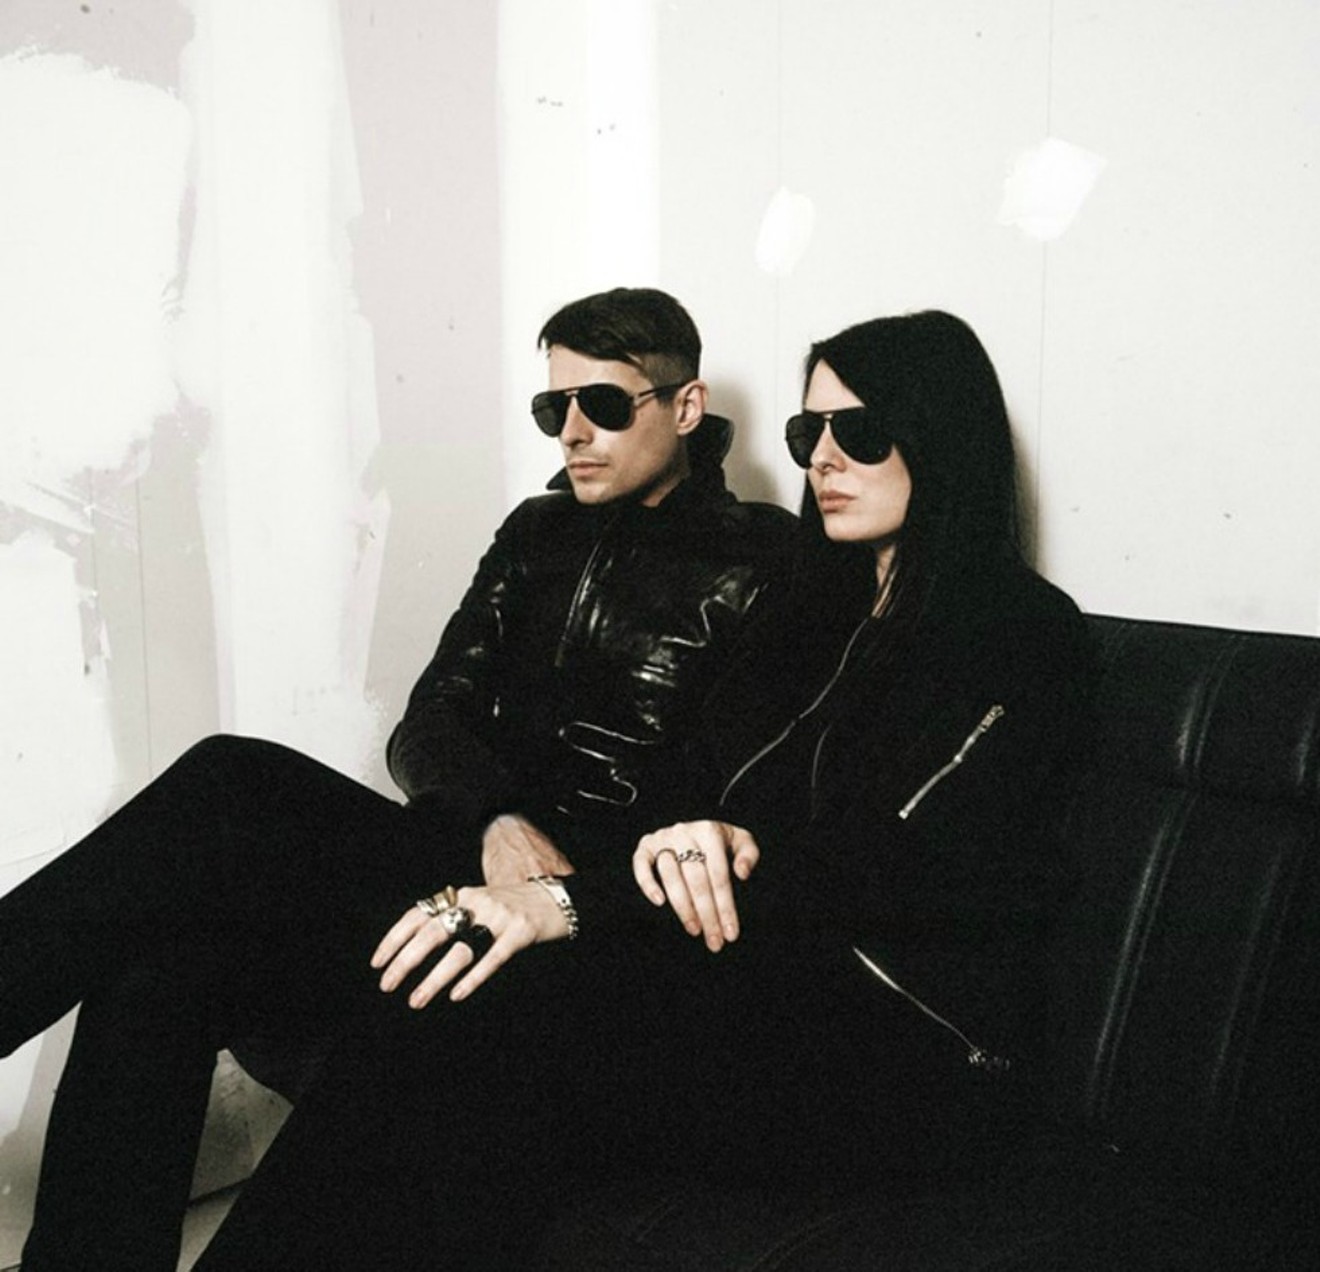 Cold Cave, the project of Wesley Eisold, left, shown with Amy Lee, concentrates on single tracks.